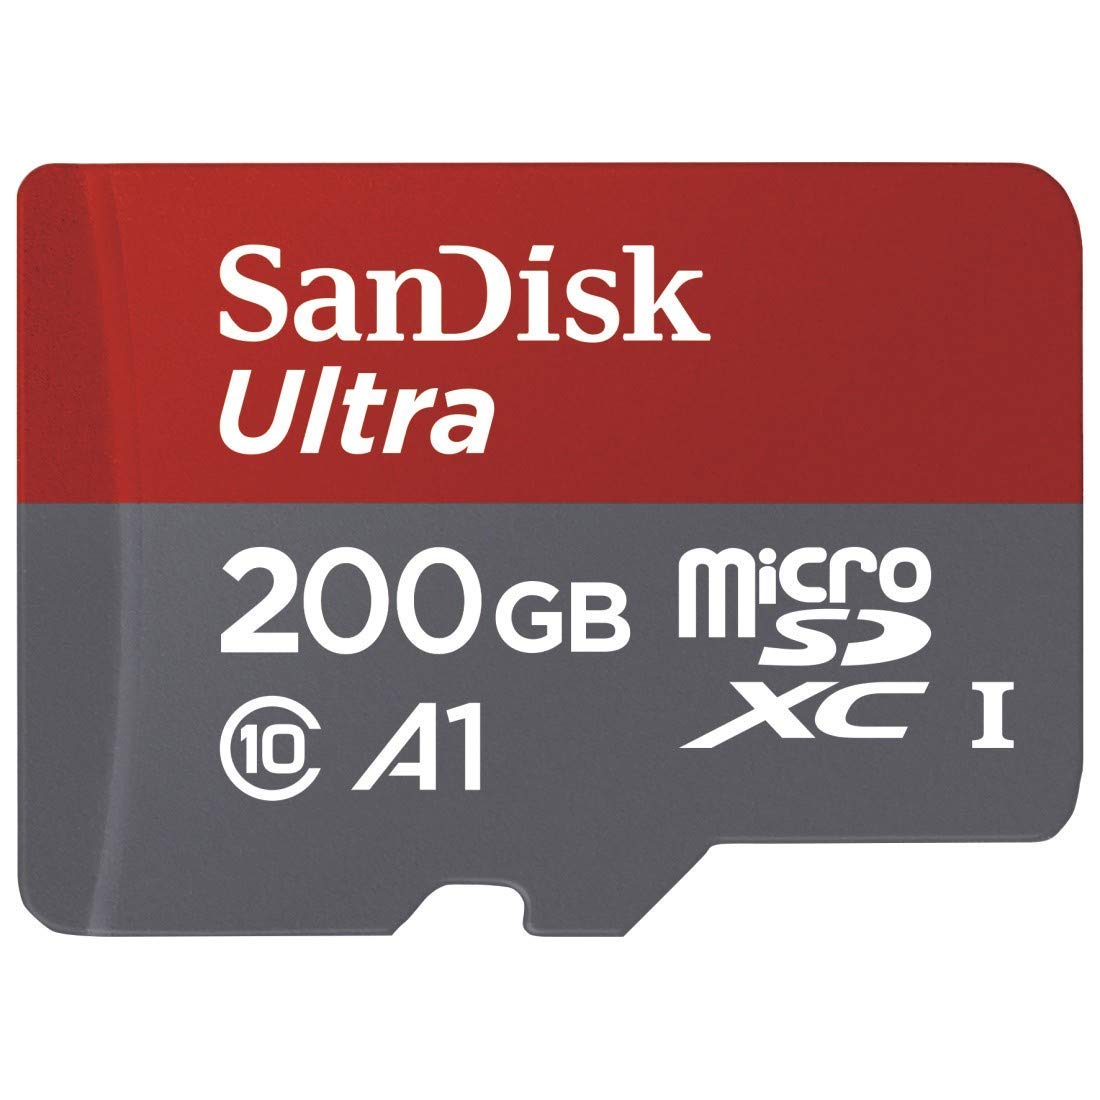 Image for Amazon is offering up a 200GB microSD card for just $24